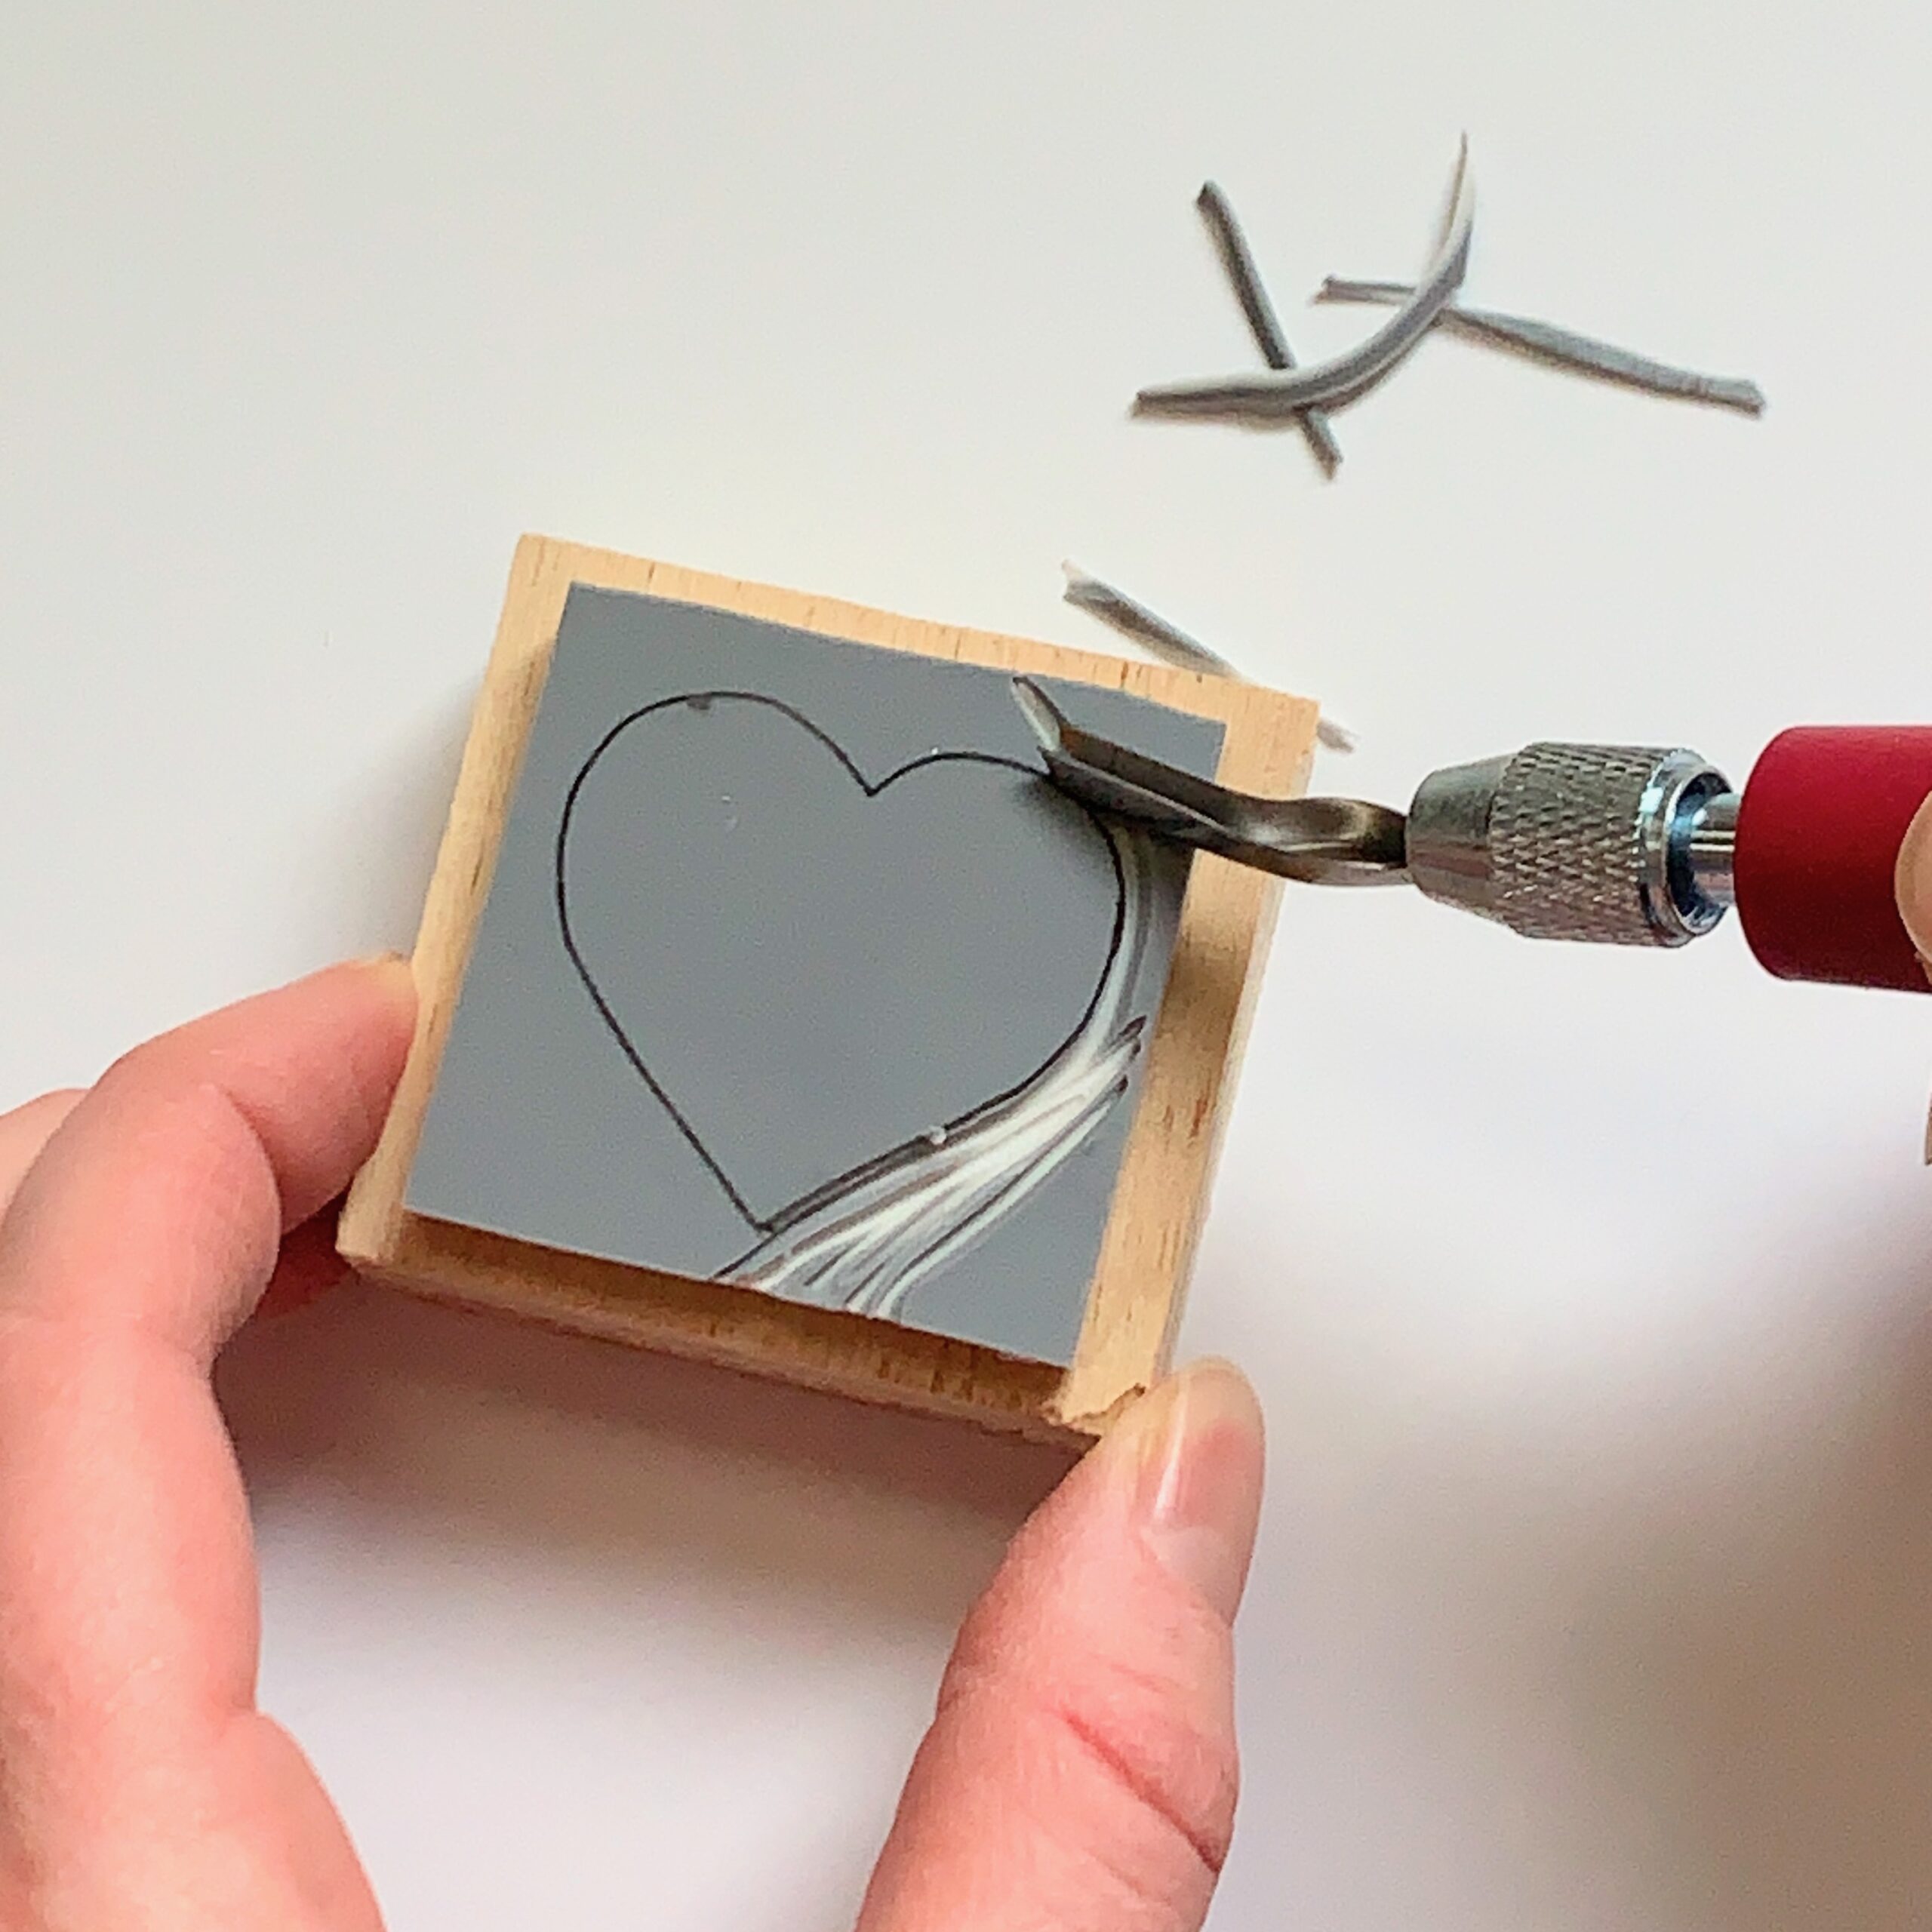 How to Make a Rubber Stamp